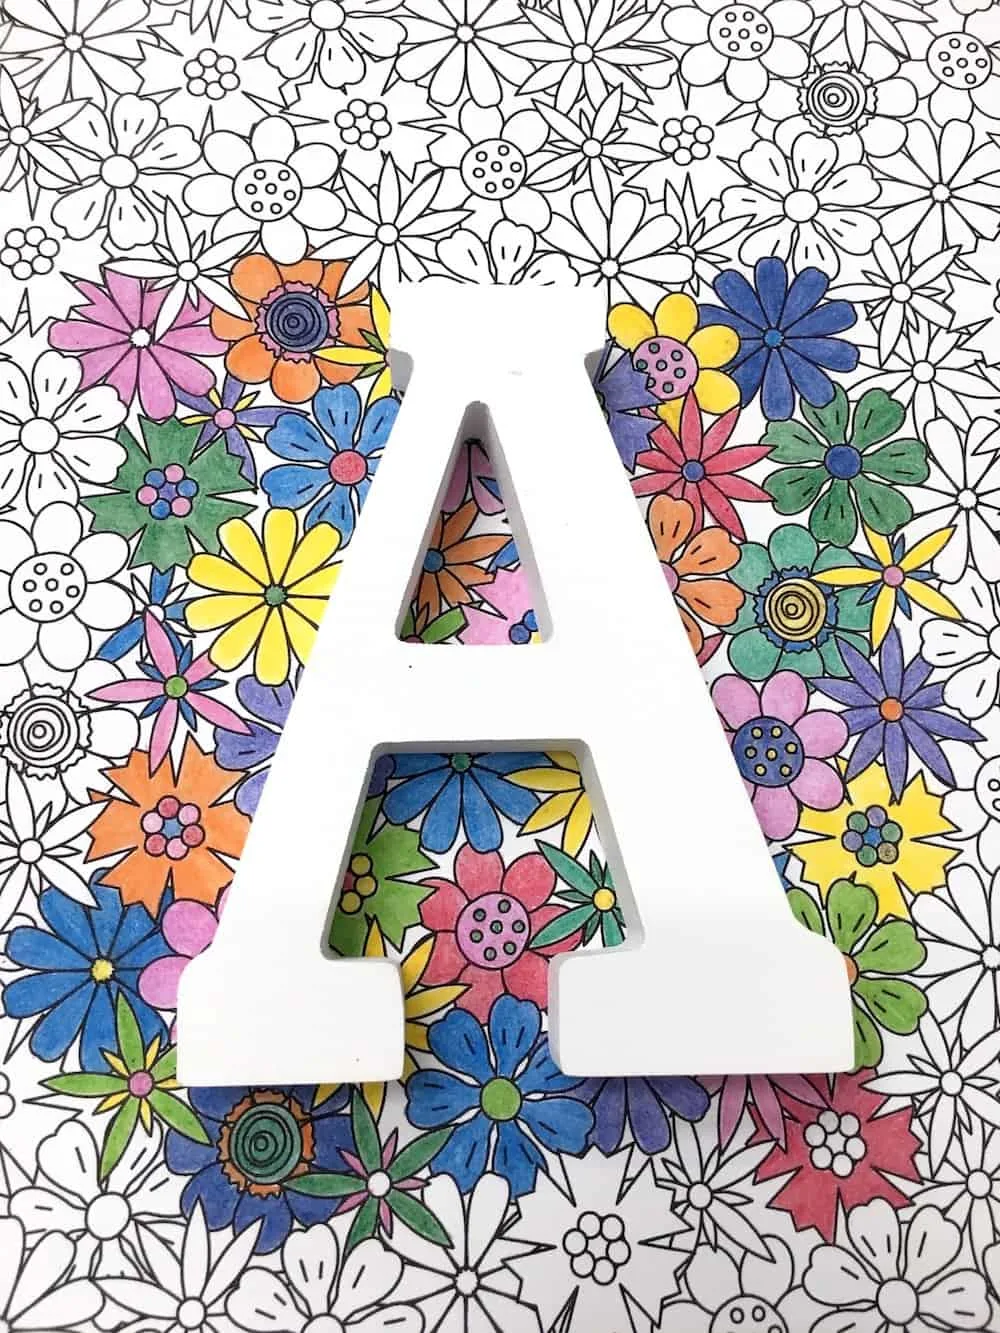 White wood letter A placed over the top of the coloring page